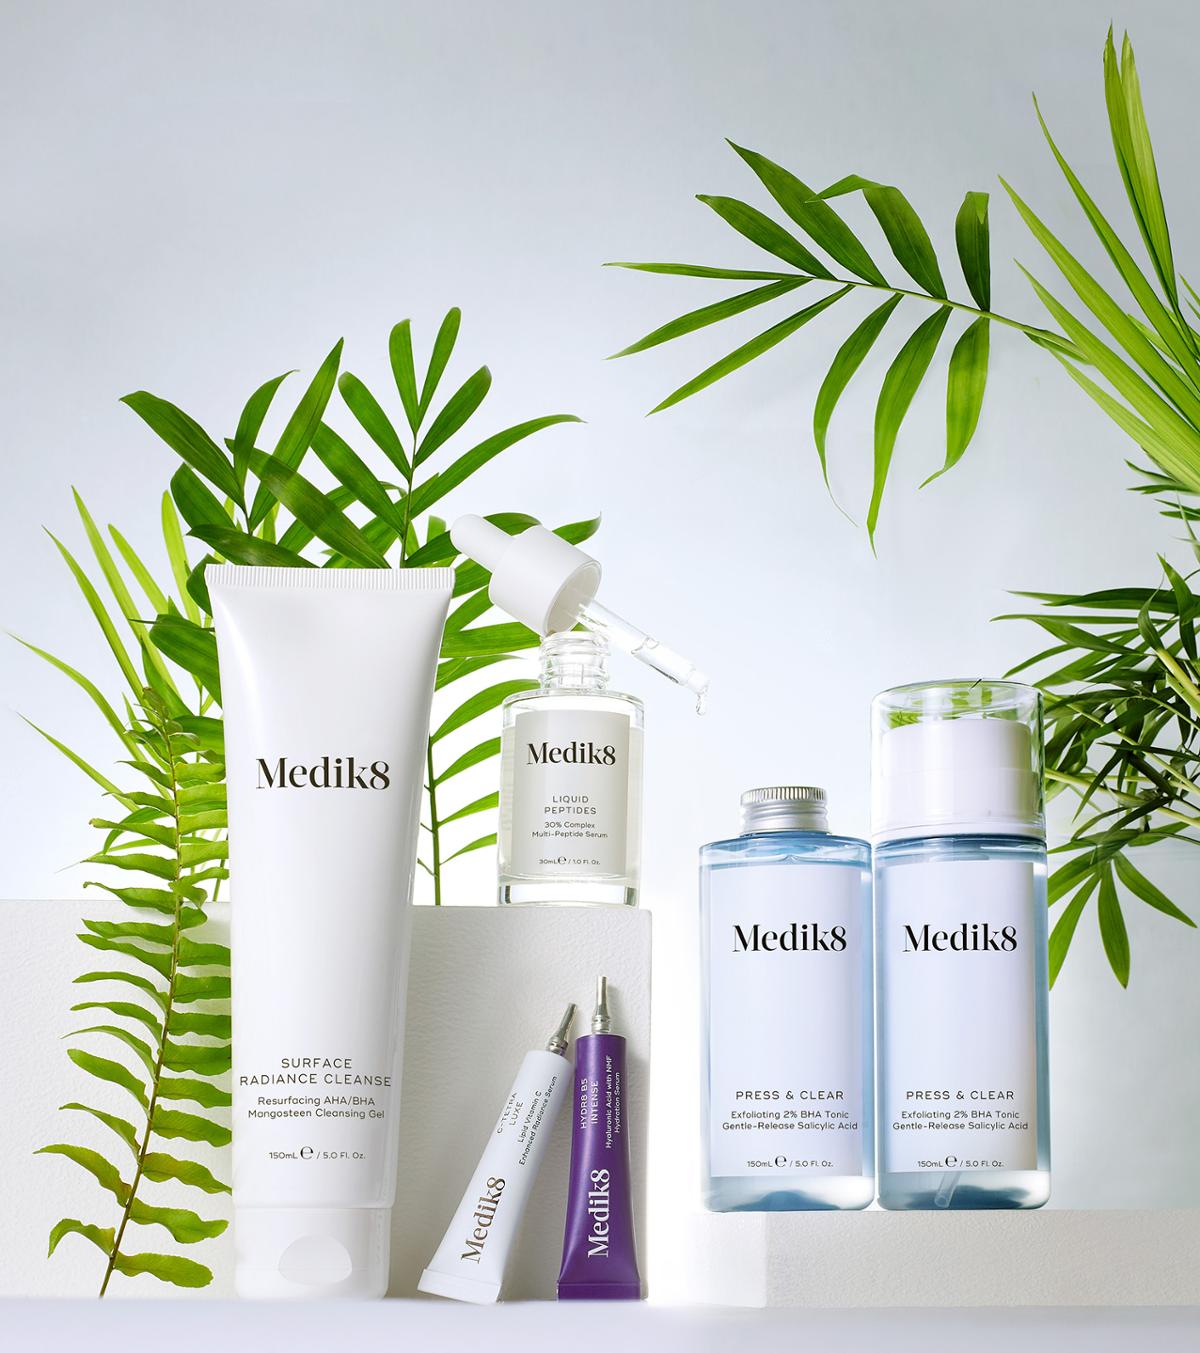 Medik8 provides a range of skincare and bodycare products and is partnered with global spas and clinics to supply a menu of facials and peels / Medik8